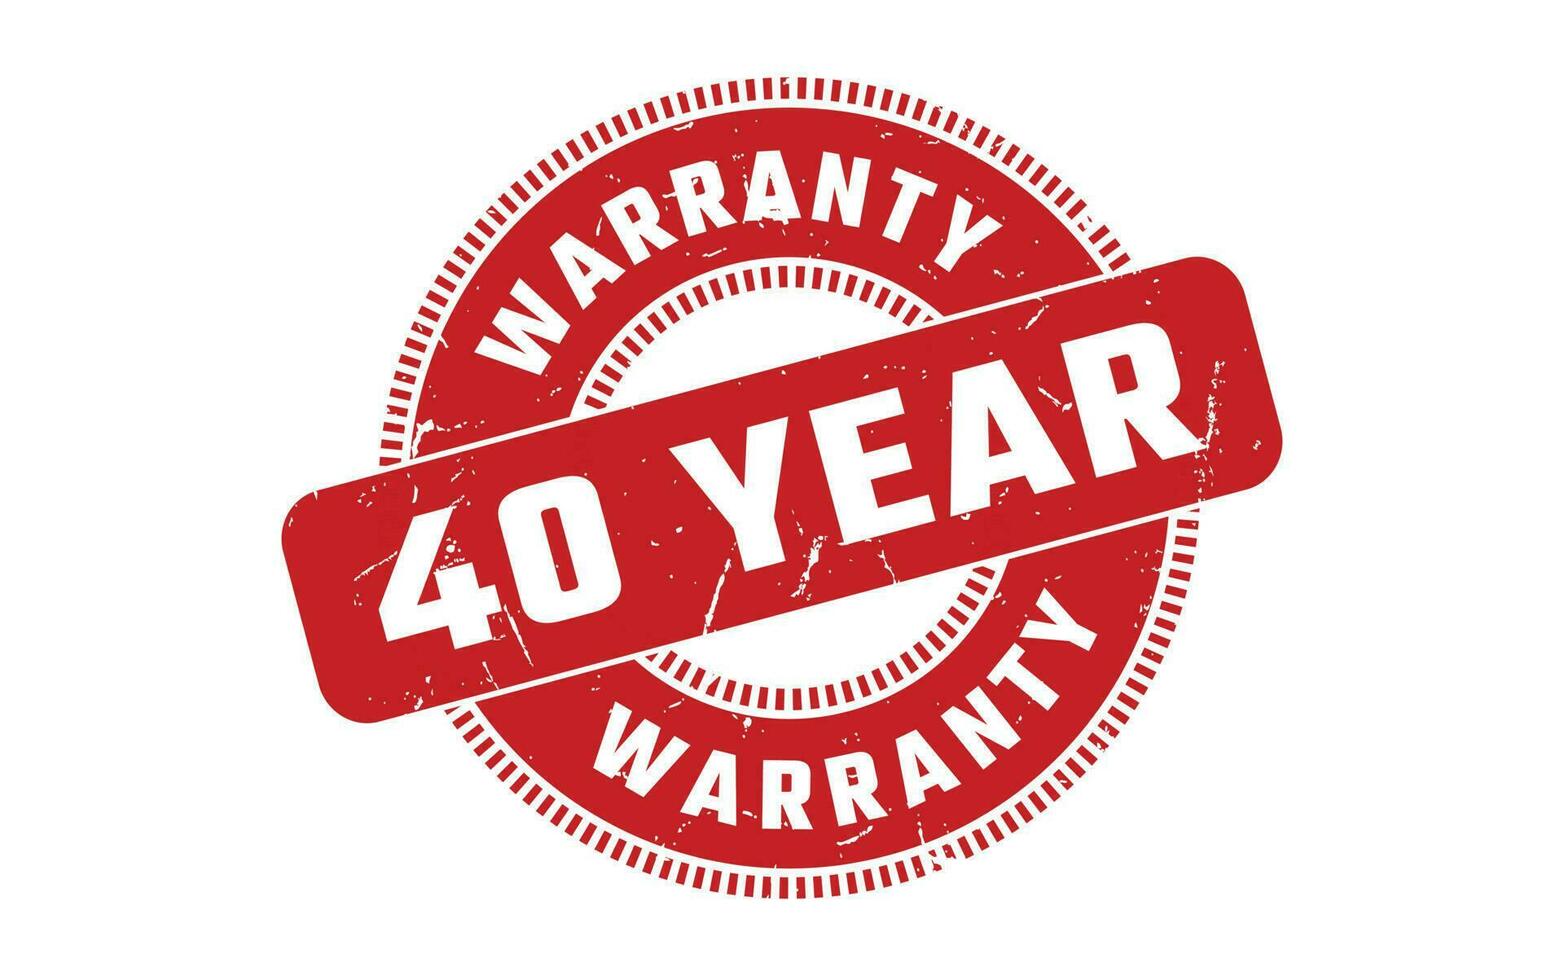 40 Year Warranty Rubber Stamp vector